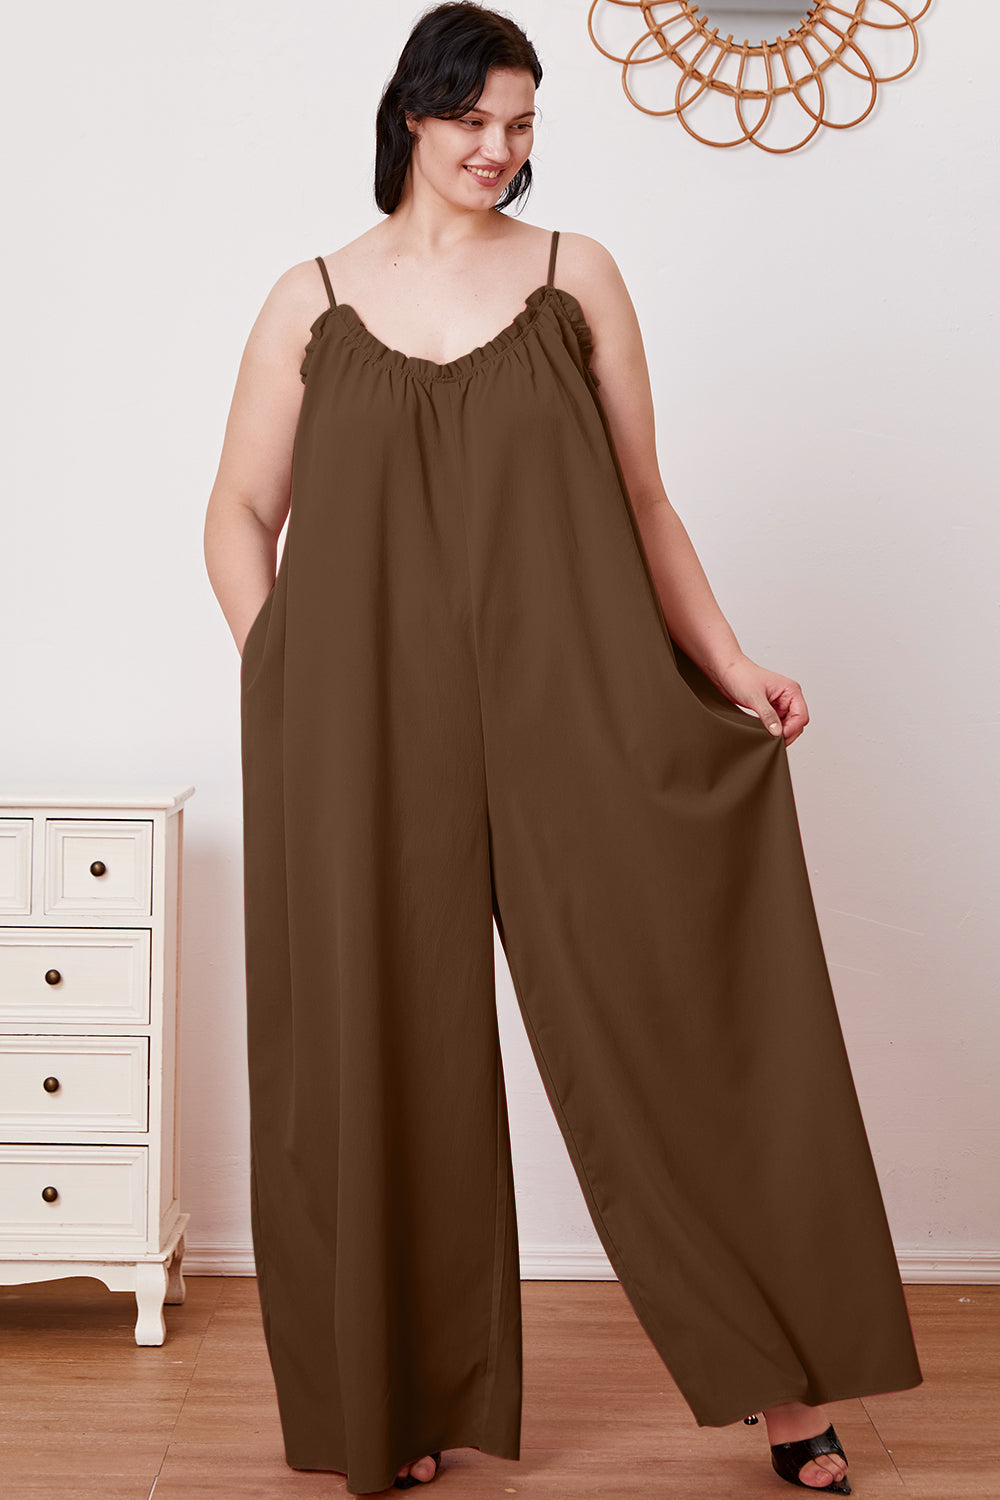 Double Take Ruffle Trim Tie Back Cami Jumpsuit with Pockets